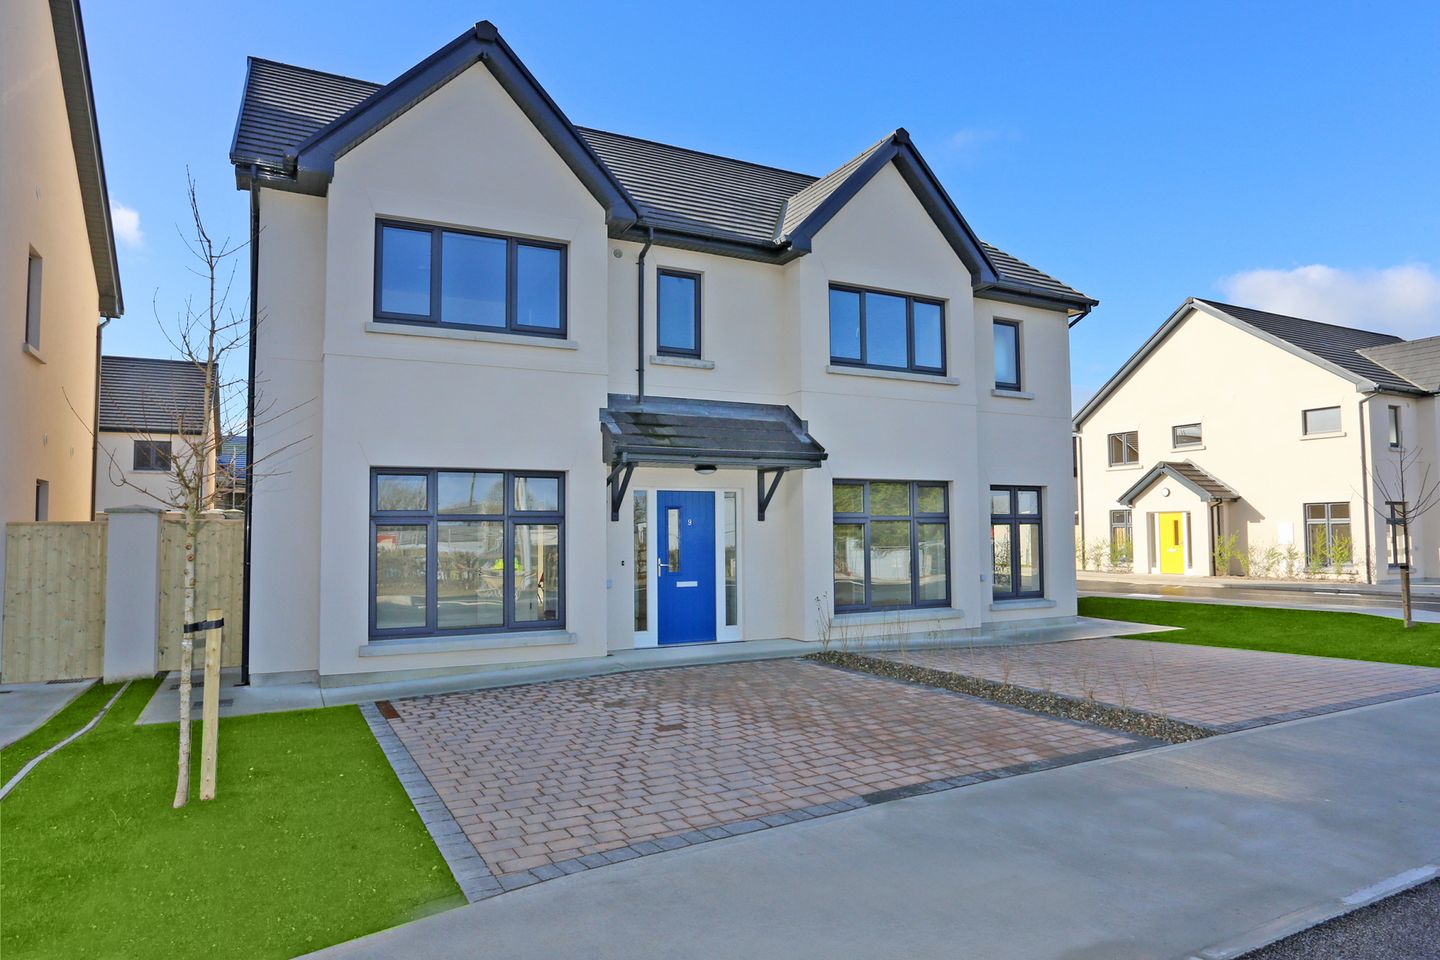 Type E1 - 3 - Bed Semi - Detached, An Tobar, Type E1 - 3 - Bed Semi - Detached, An Tobar, Patrickswell, Co. Limerick